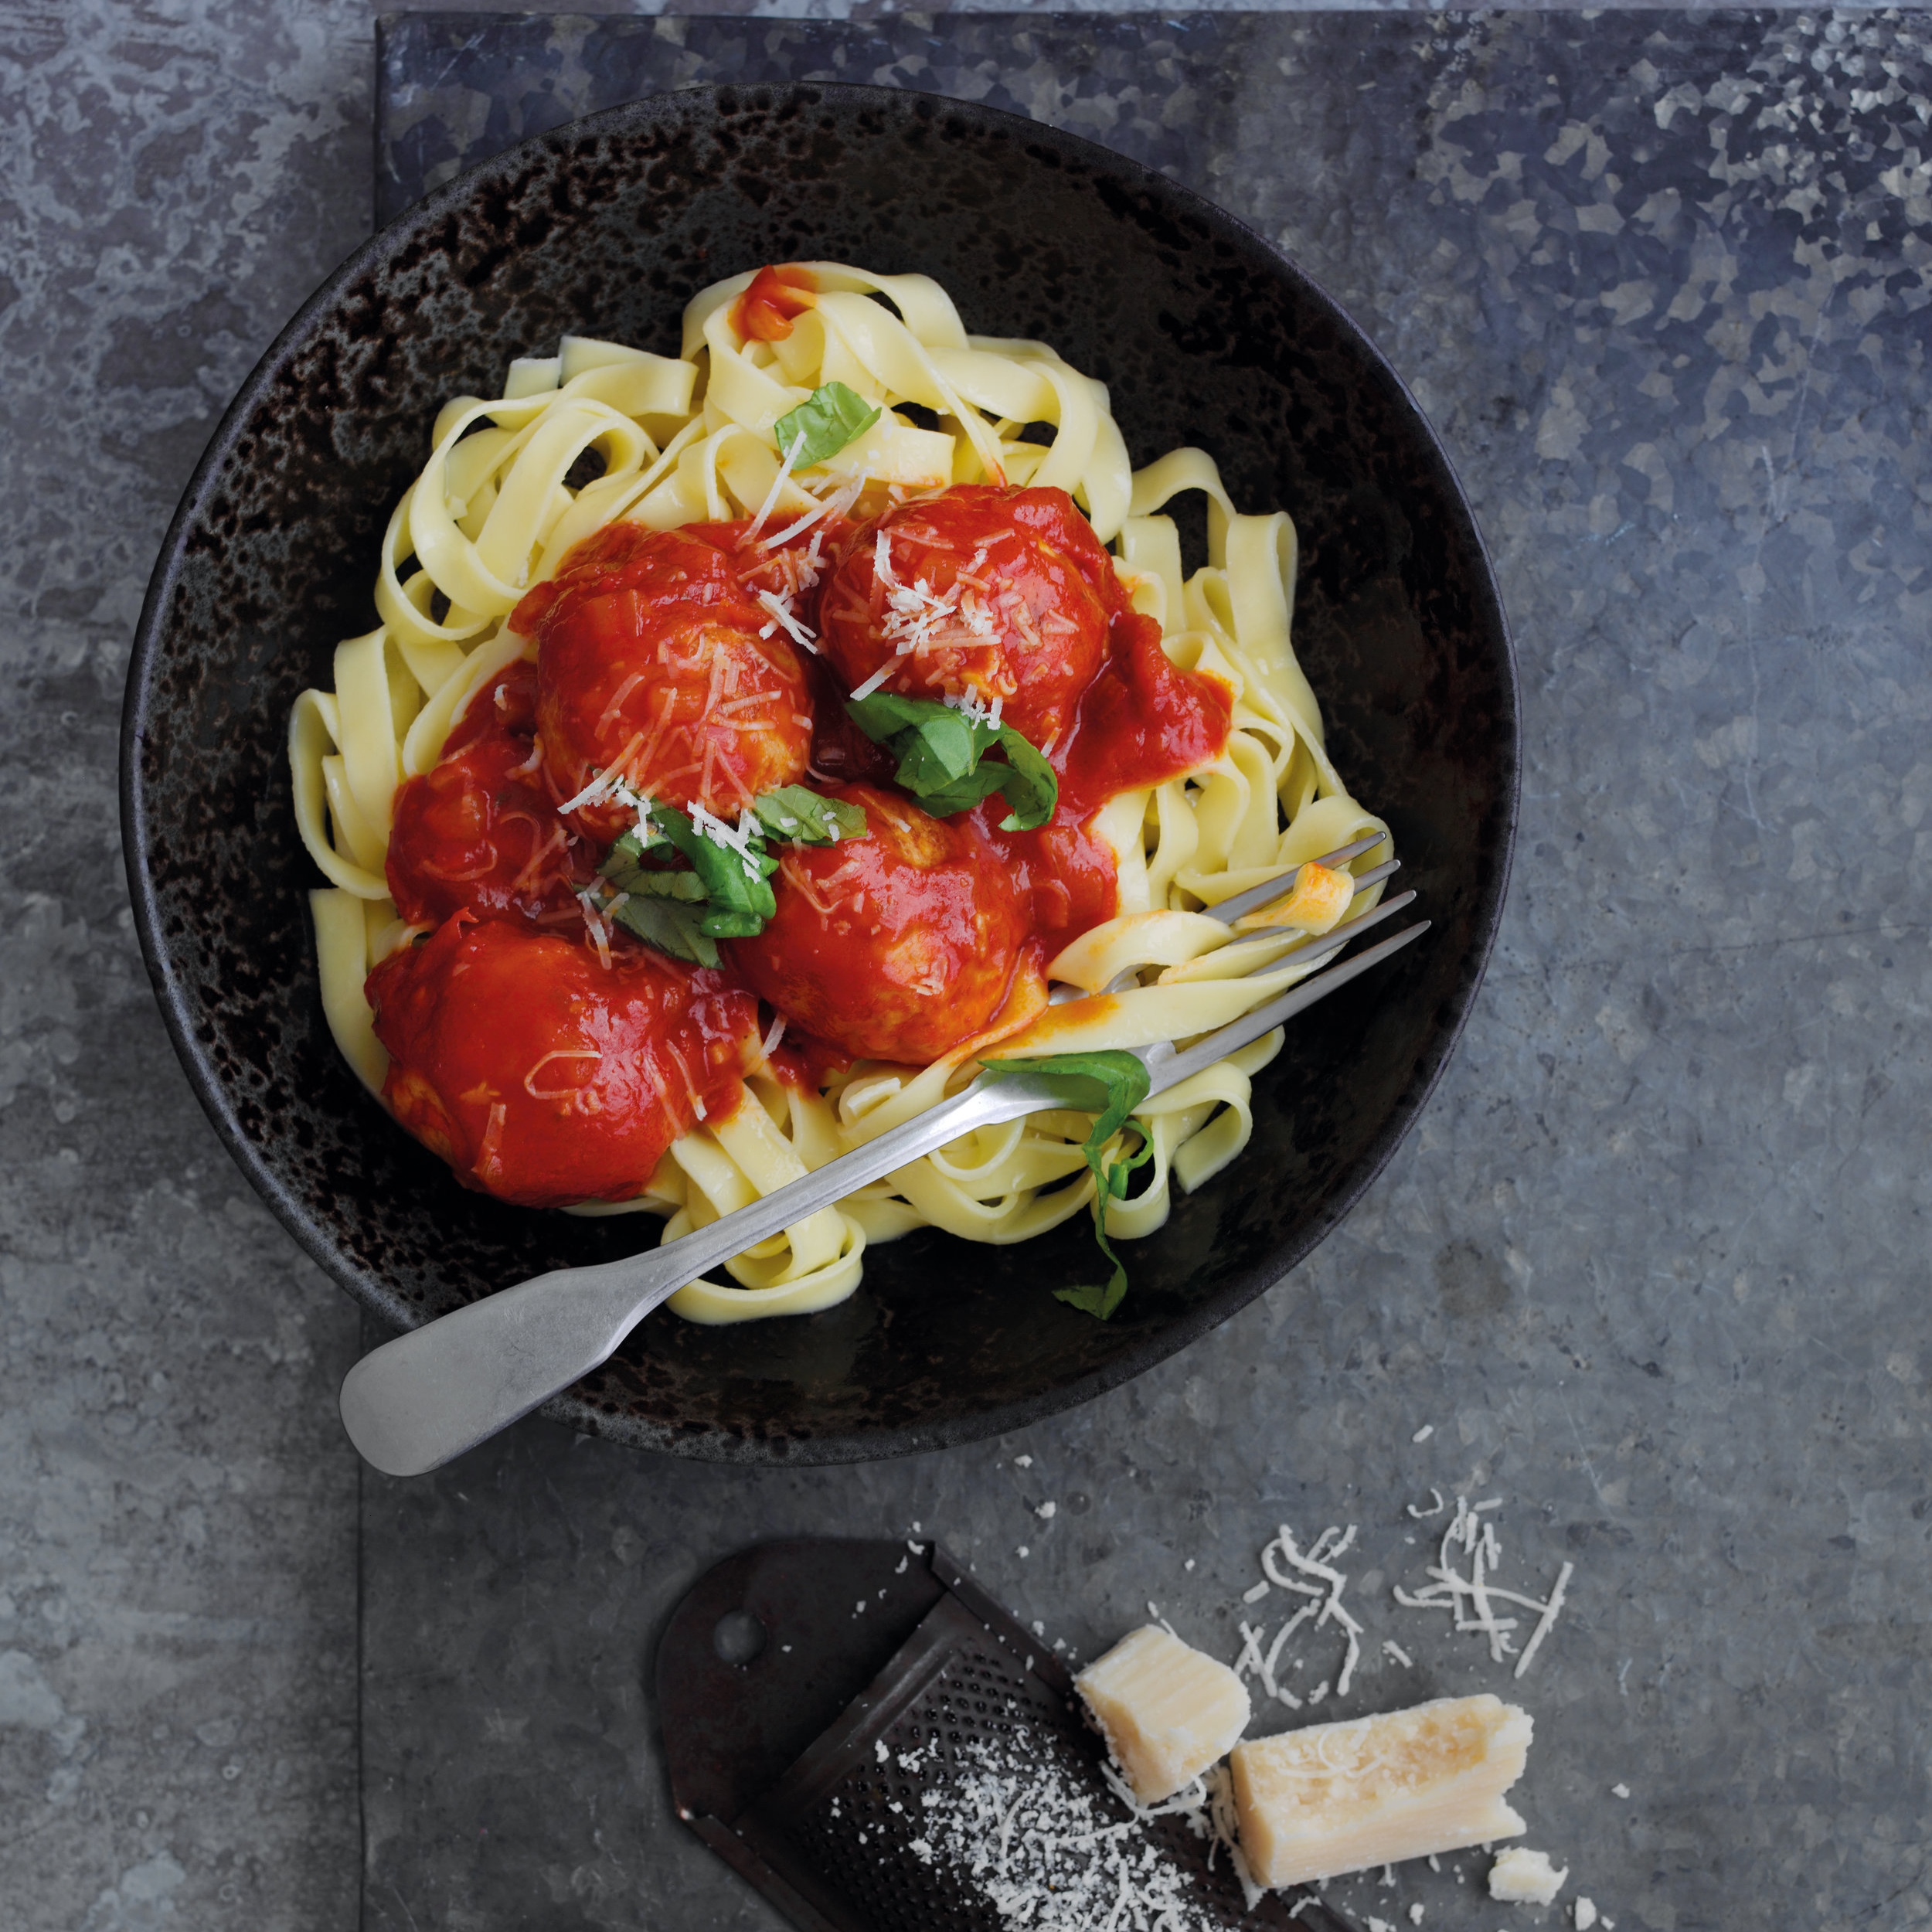 Pheasant meatballs with green olives, sun-dried tomatoes, herbs &amp; tagliatelle pasta Source: Game Larder